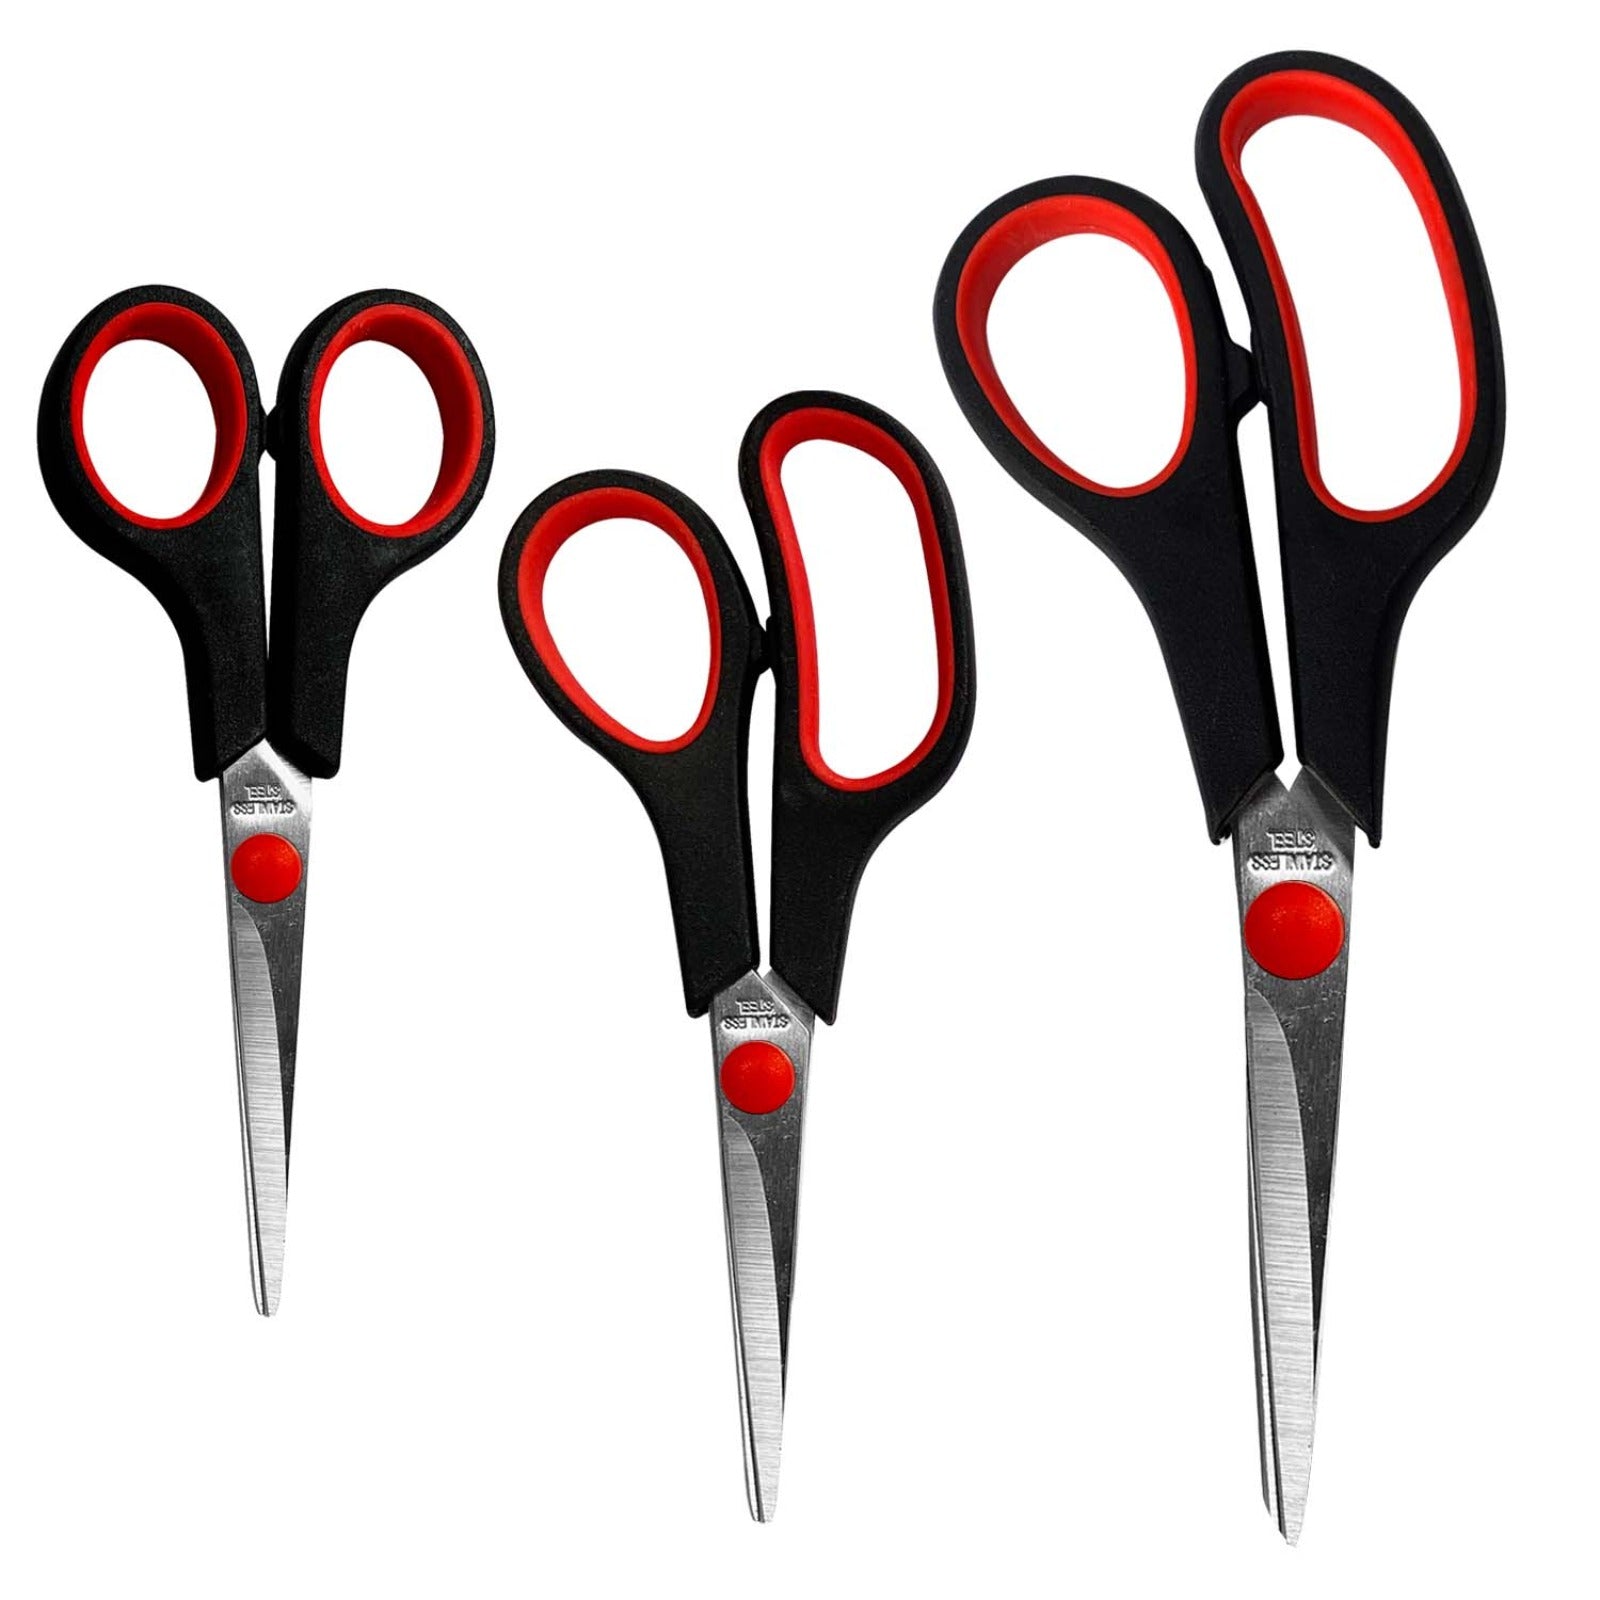 Kleva® Essential Kitchen Scissor 3 Pack - Perfect for Herbs, Meat to Fabric and Paper!  Bunnings Marketplace   